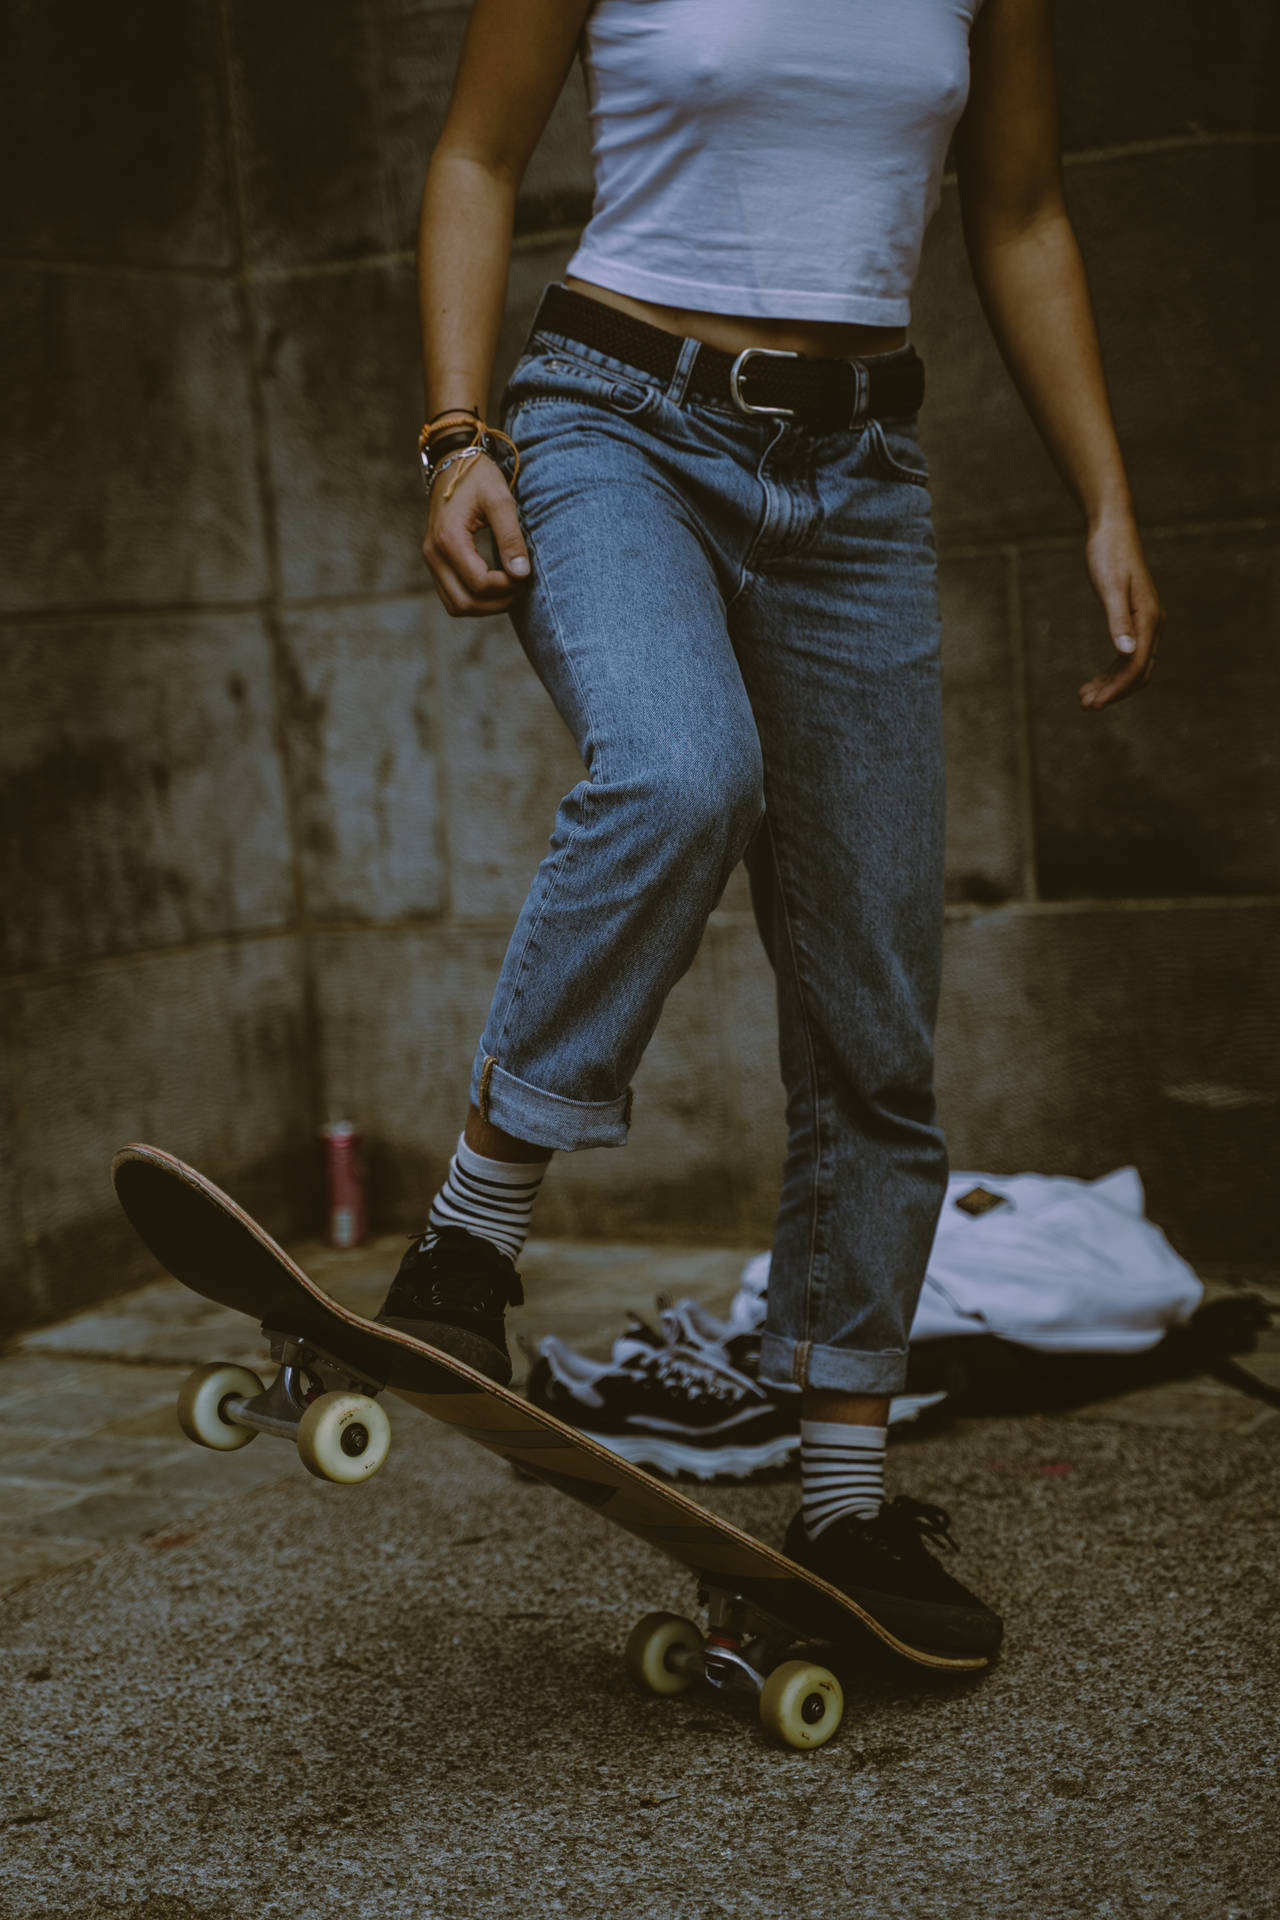 Ready For An Exciting Skateboard Ride. Background